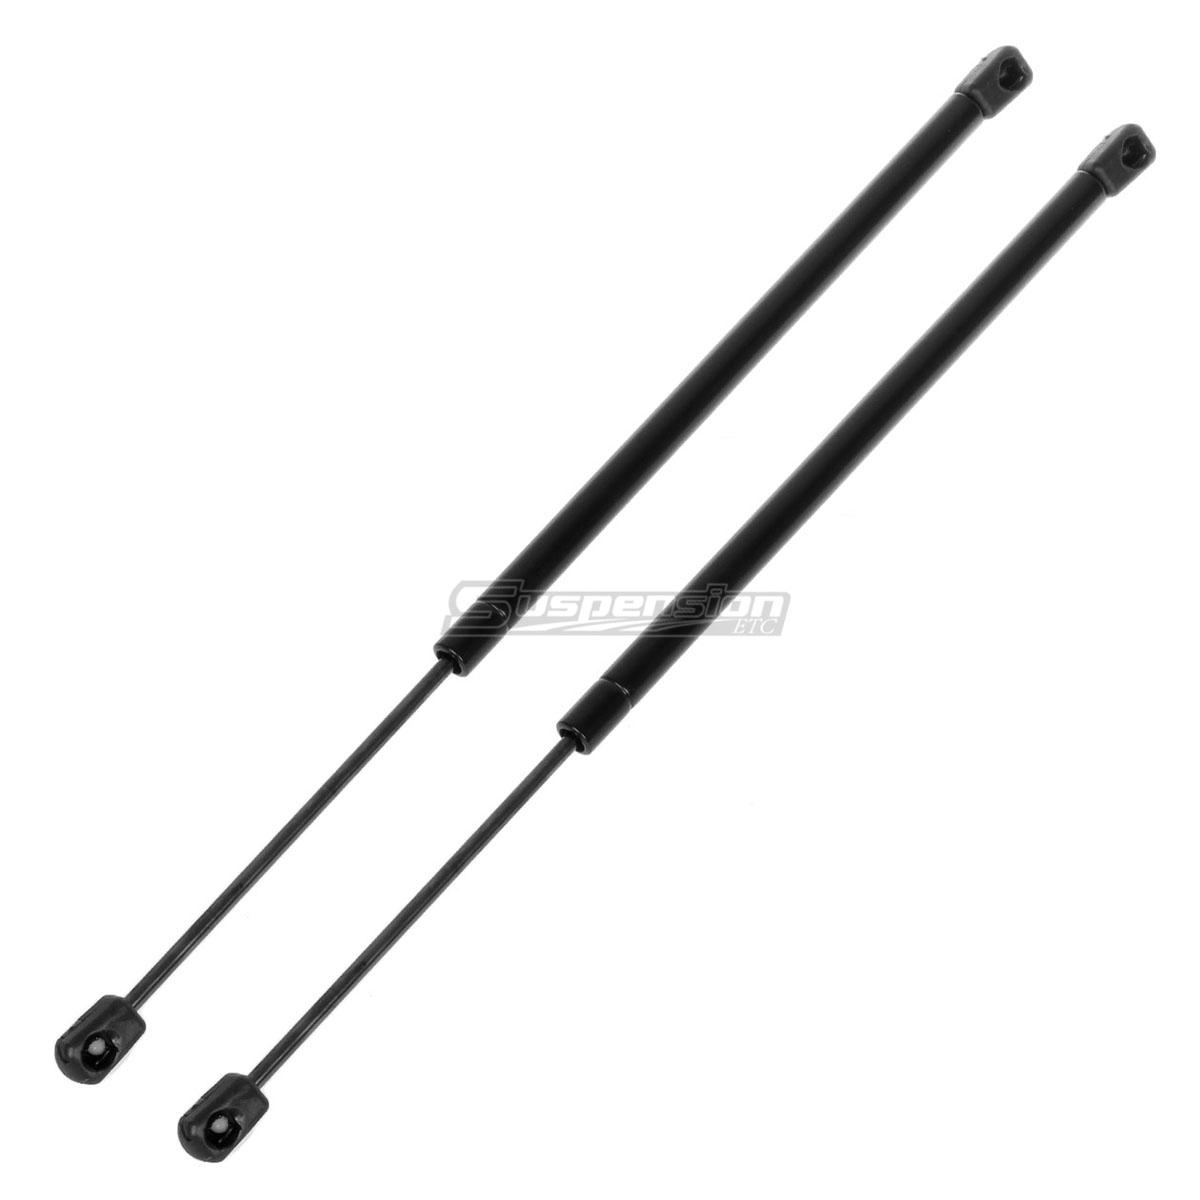 Qty 2 Tailgate Gas Springs Prop Lift Support Strut Fits Nissan Pathfinder 99-04